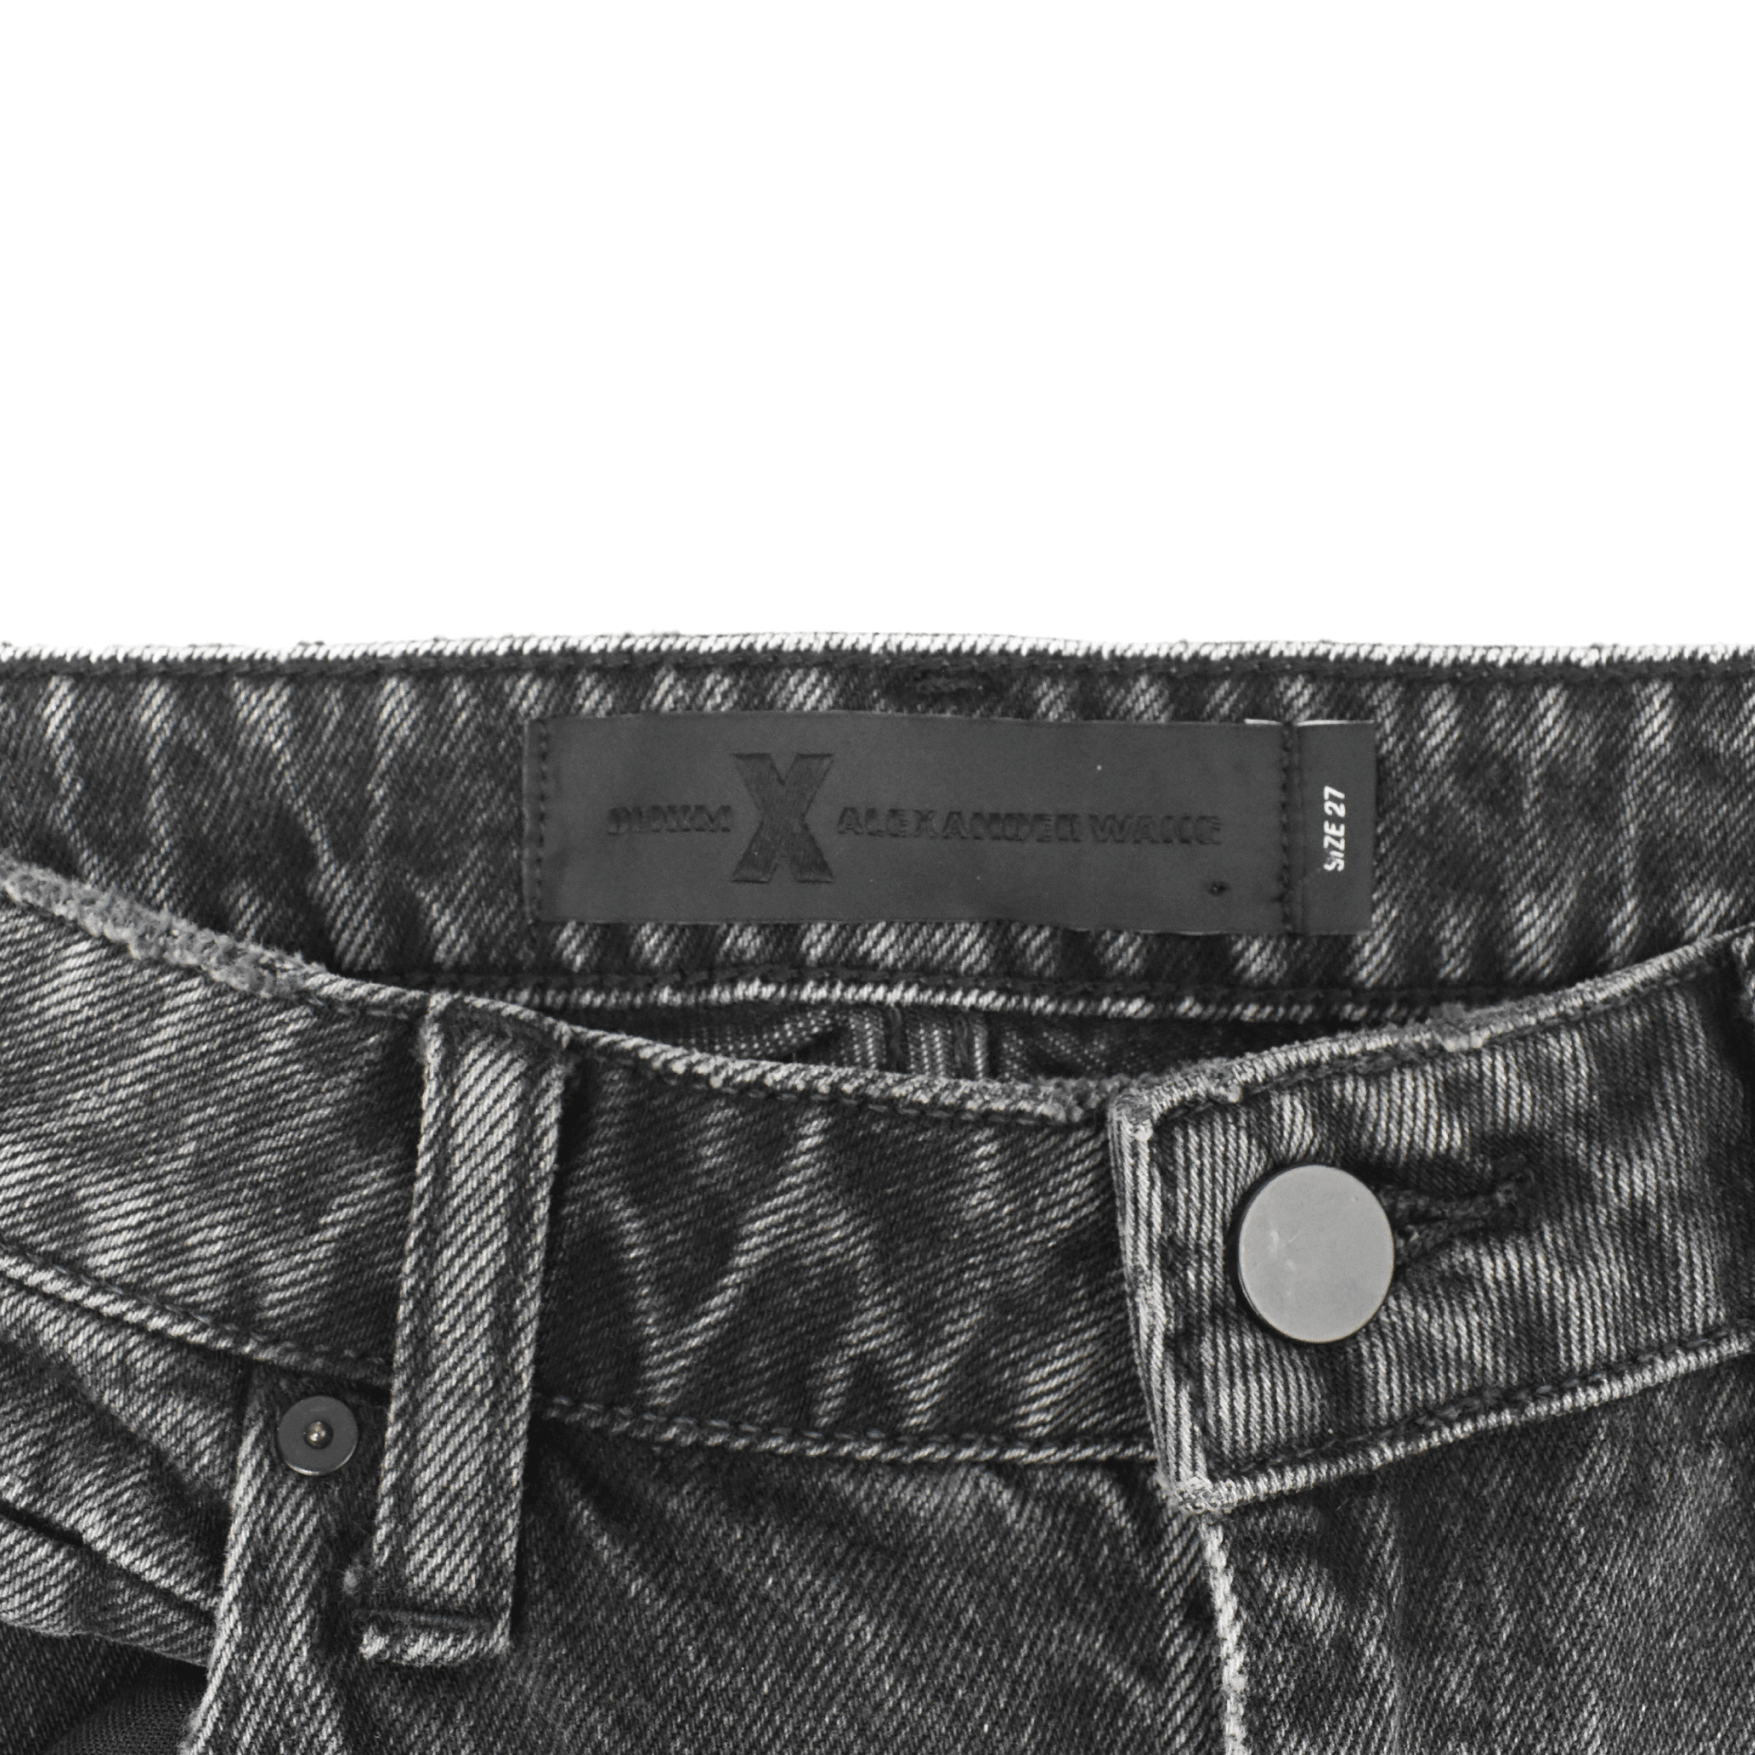 Alexander Wang Jeans - Women's 27 - Fashionably Yours